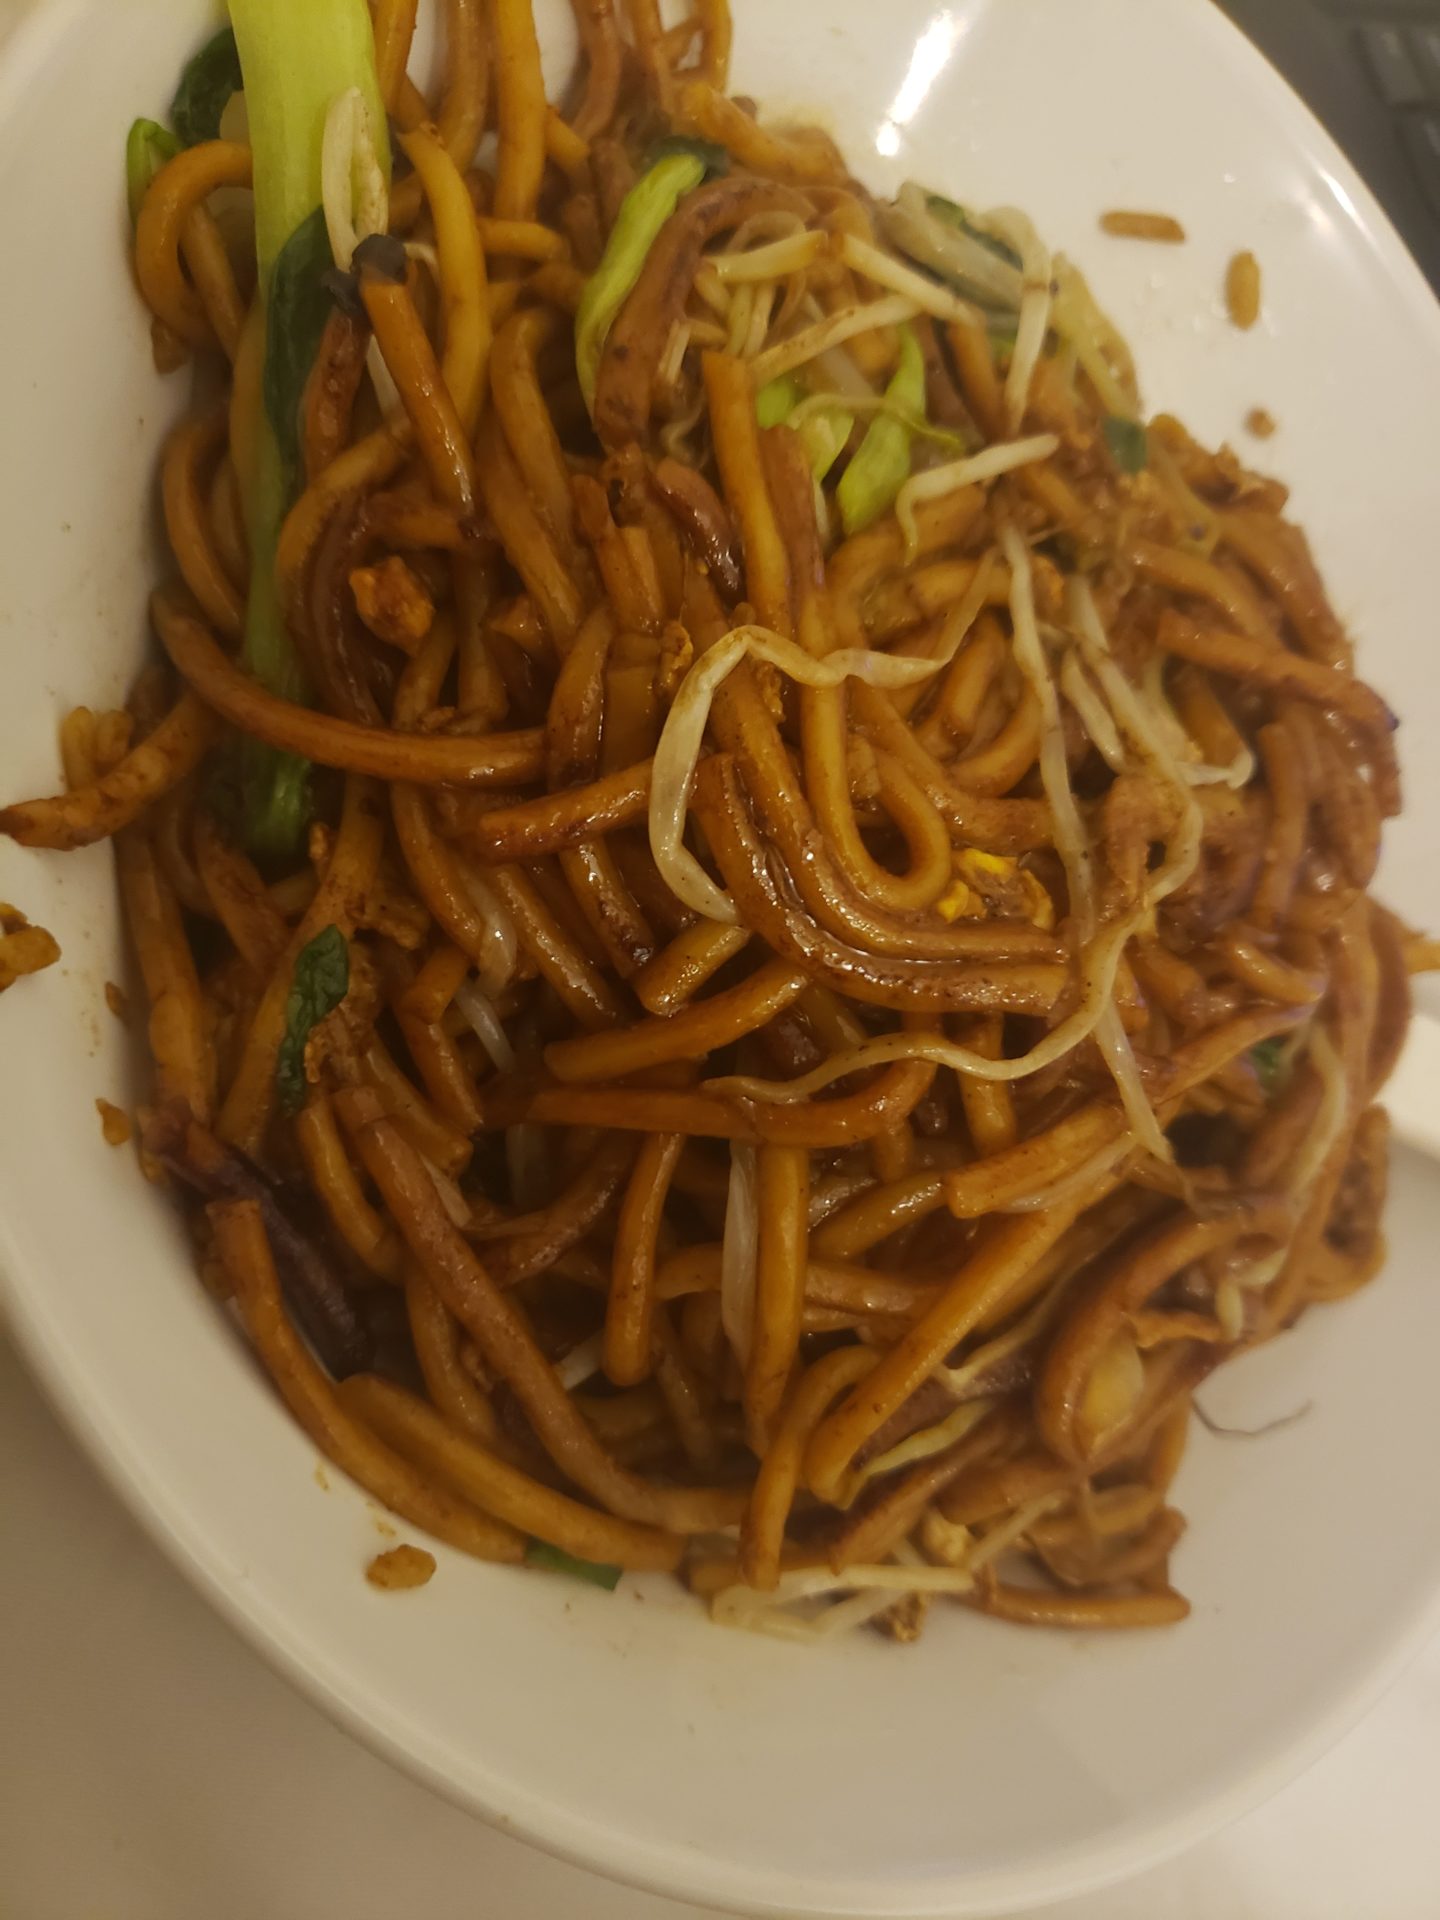 a plate of noodles and vegetables